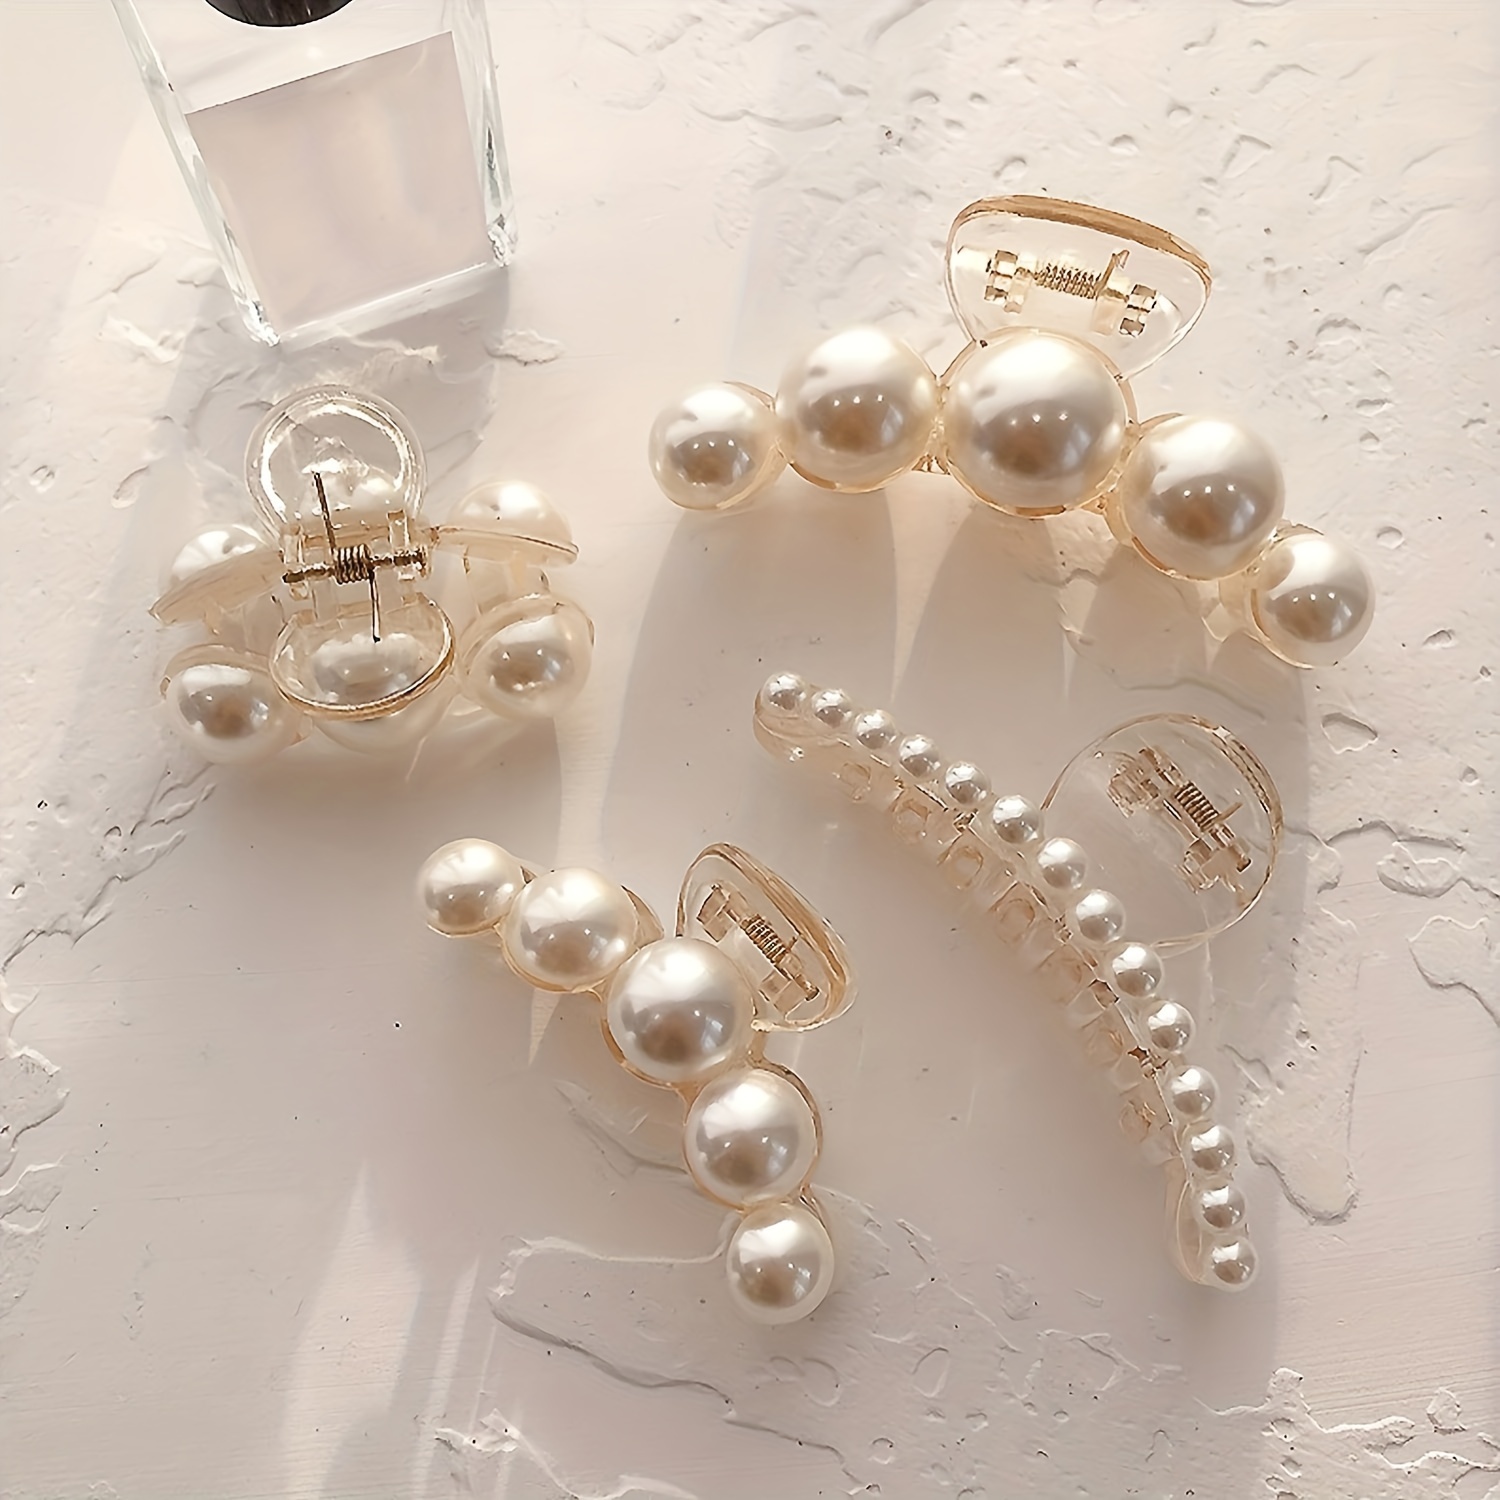 

4pcs Elegant Faux Pearl Hair Claw Clips Set, Vintage Non-slip Fashion Hair Accessories For Women And Girls, Simple Chic Style Hair Grabs For Everyday Wear